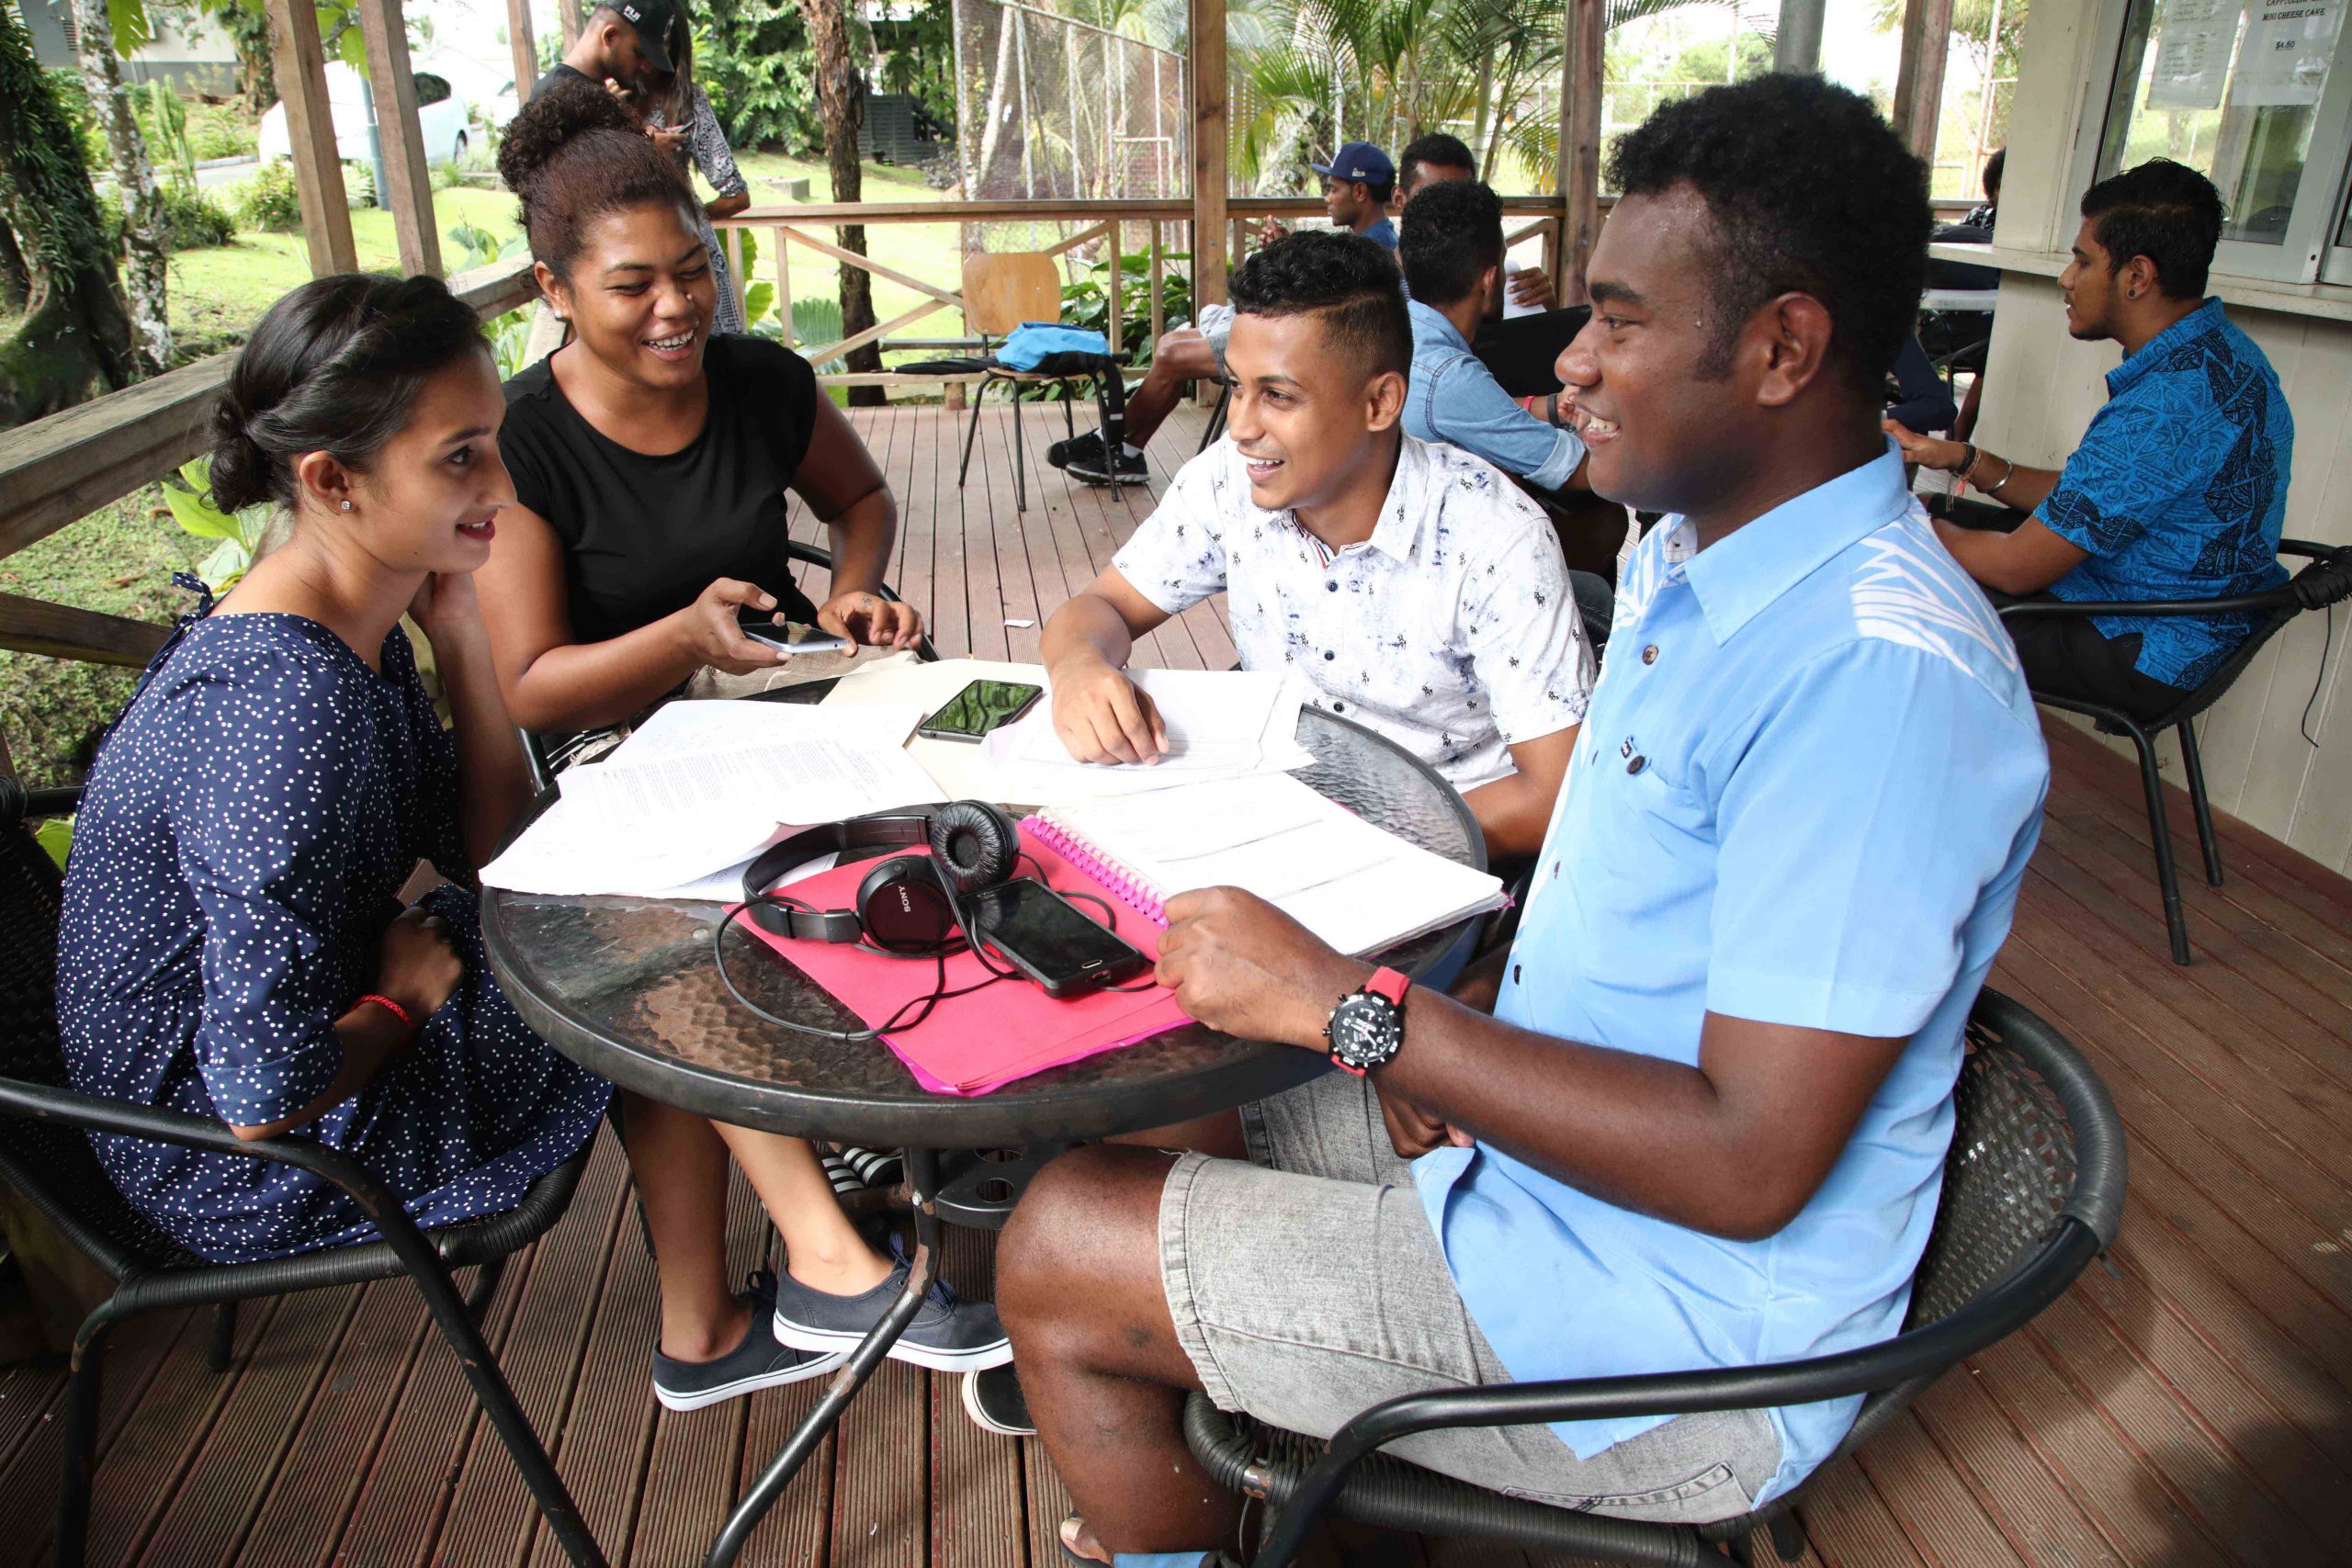 FNU students in deep discussions. Interested students have until 14 February to apply and enrol at FNU